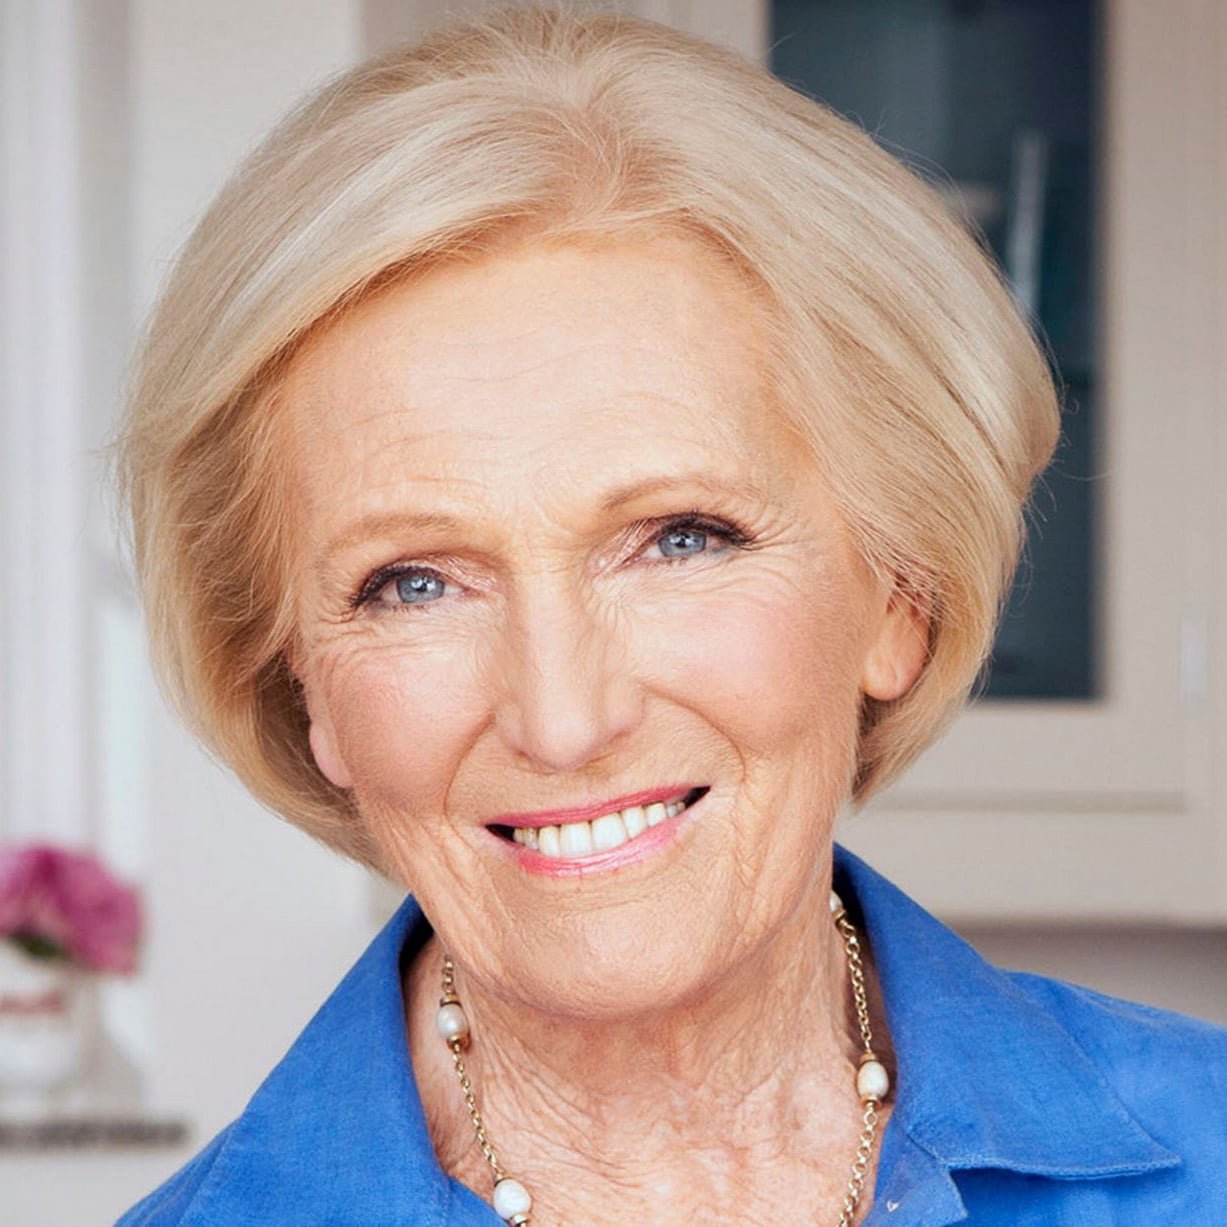 Former Bake Off judge and celebrity baker Mary Berry in Tipperary to taste  local delicacy - Tipperary Live